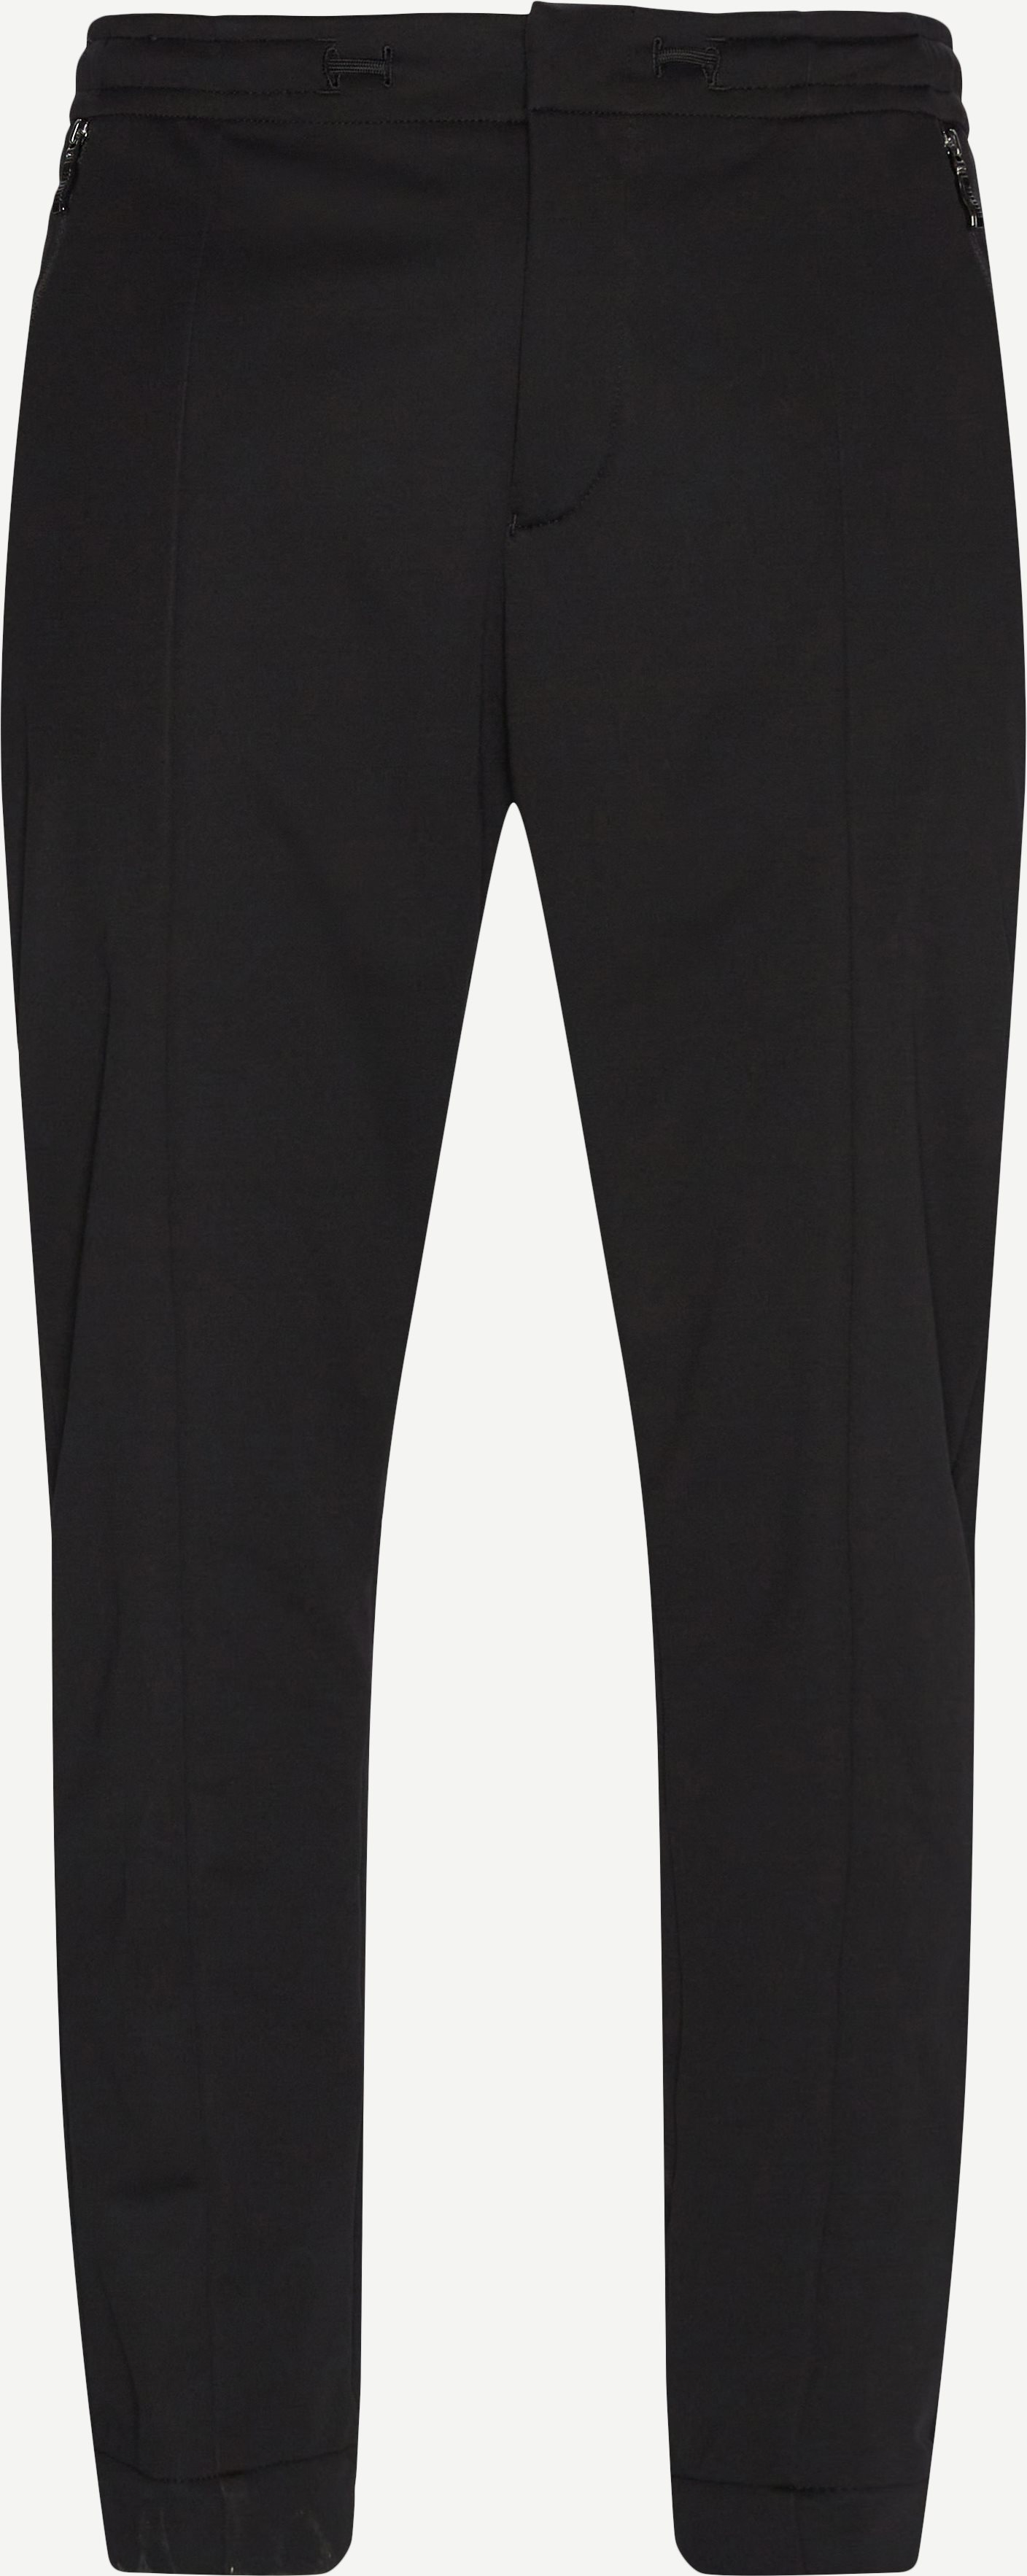 Trousers - Tapered fit - Black